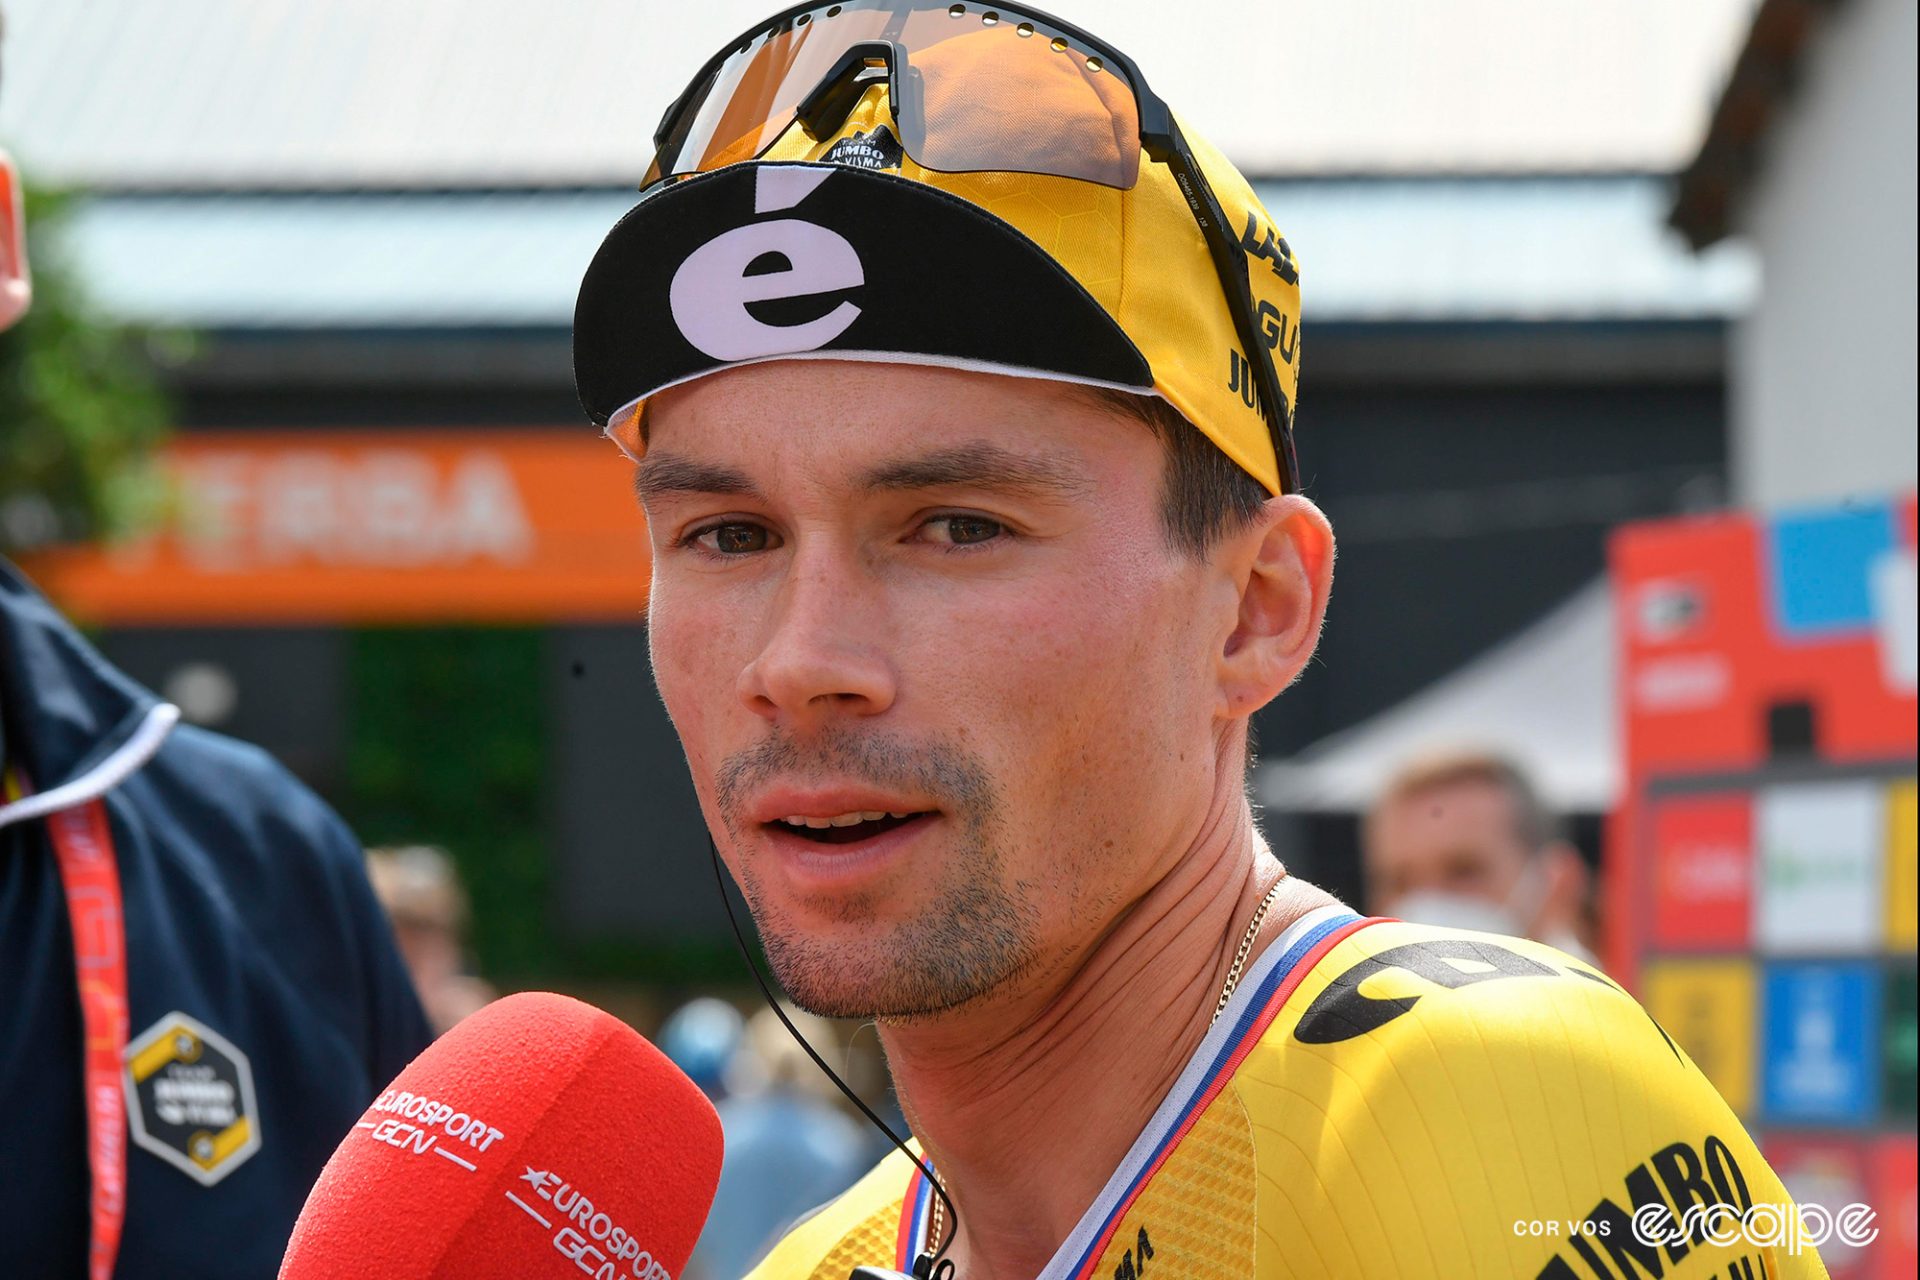 Primož Roglič in profile, speaking to a TV microphone at a race. He's wearing a Jumbo team cap with a large Cervelo E.